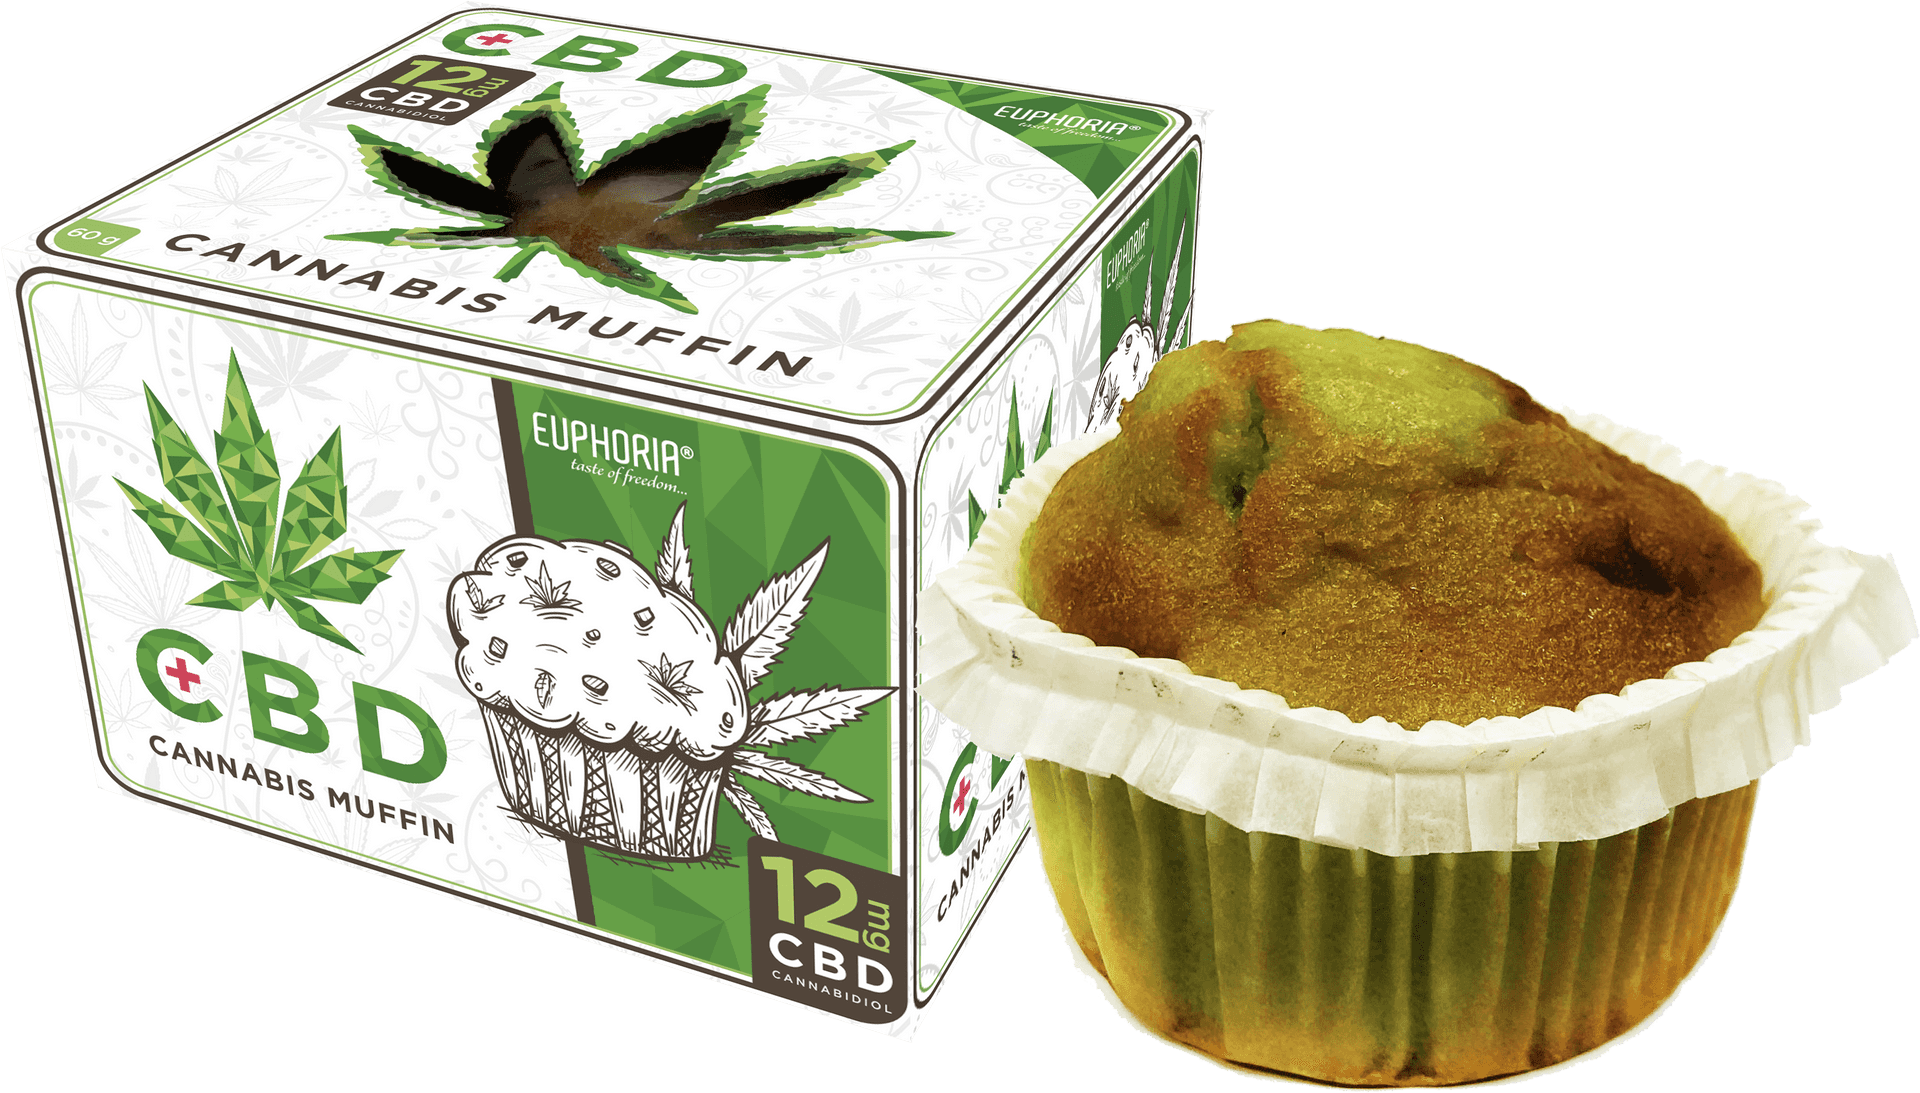 C B D Cannabis Muffin Packagingand Product PNG